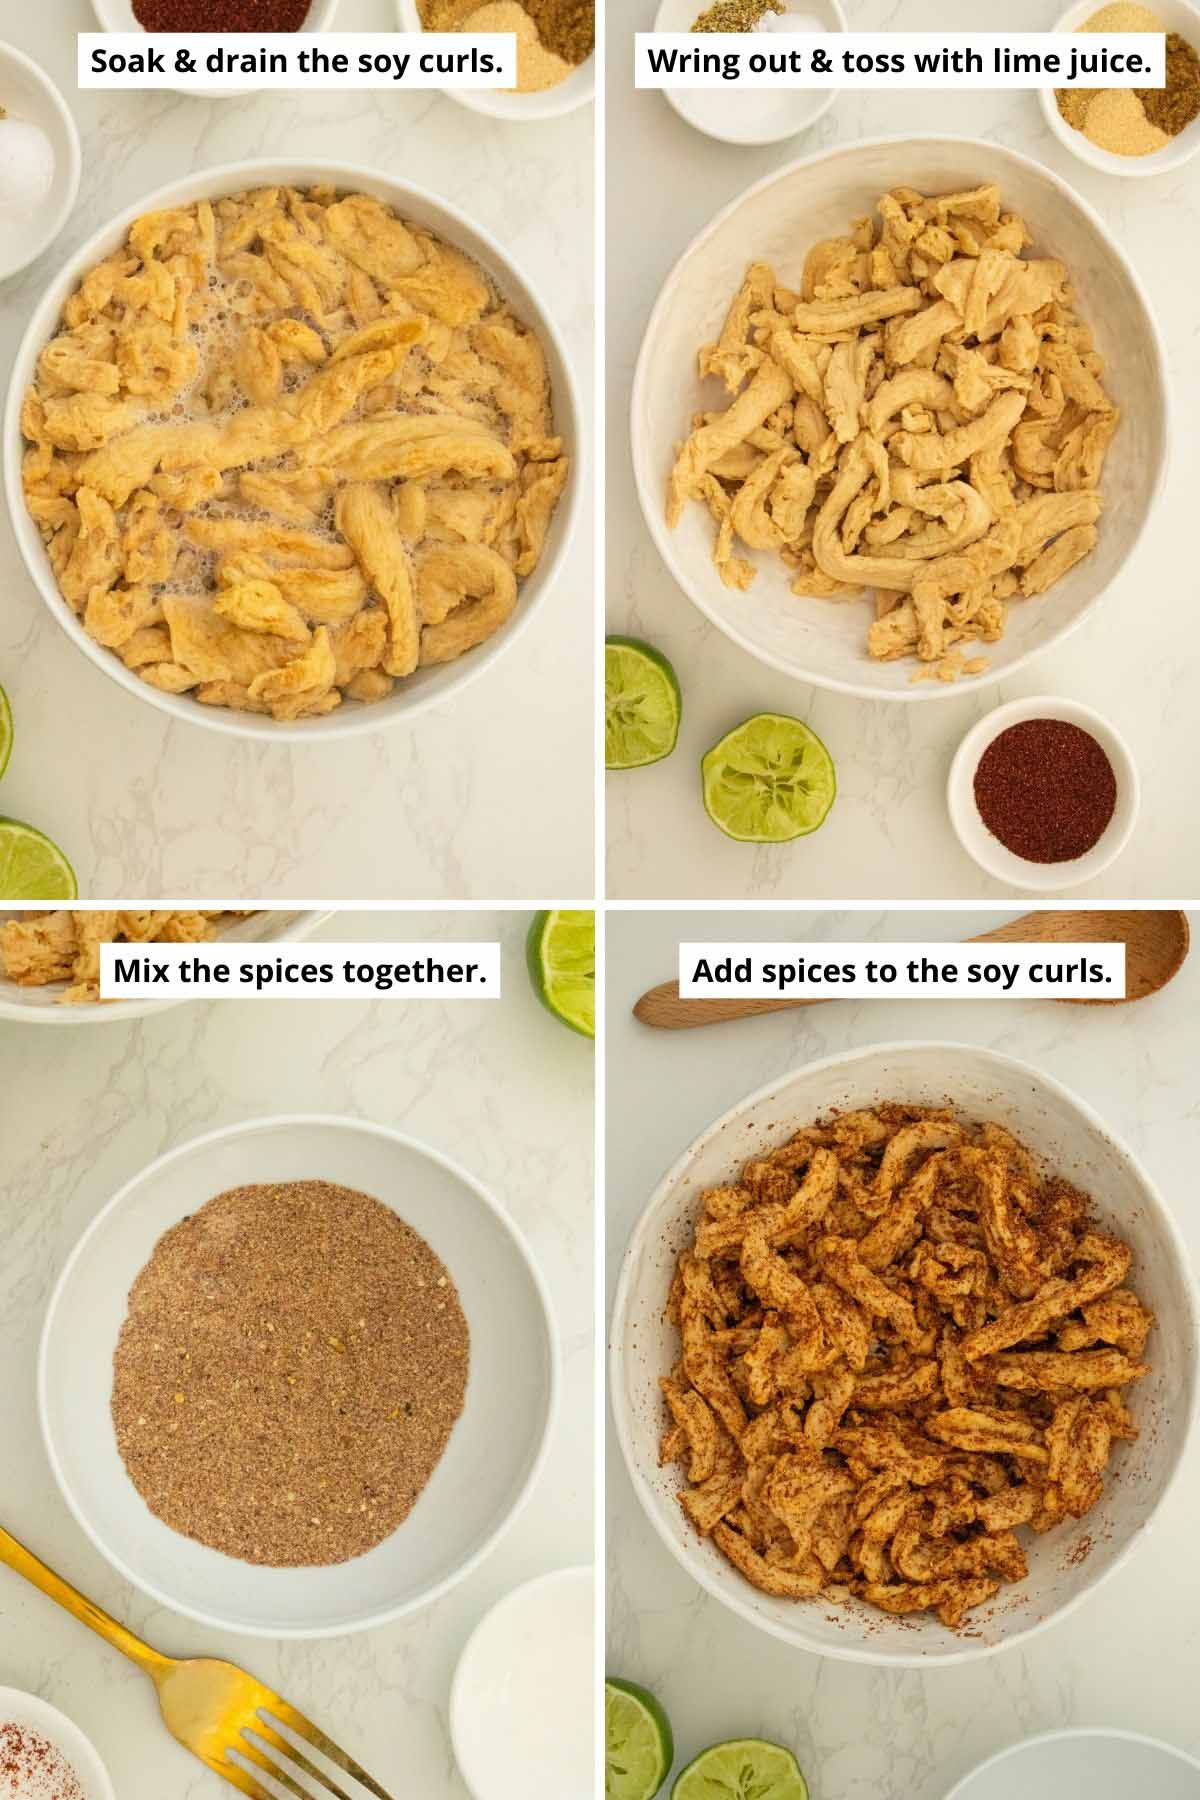 image collage showing soaking soy curls, drained soy curls tossed with lime juice, the spice mix, and the soy curls tossed in the spice mix